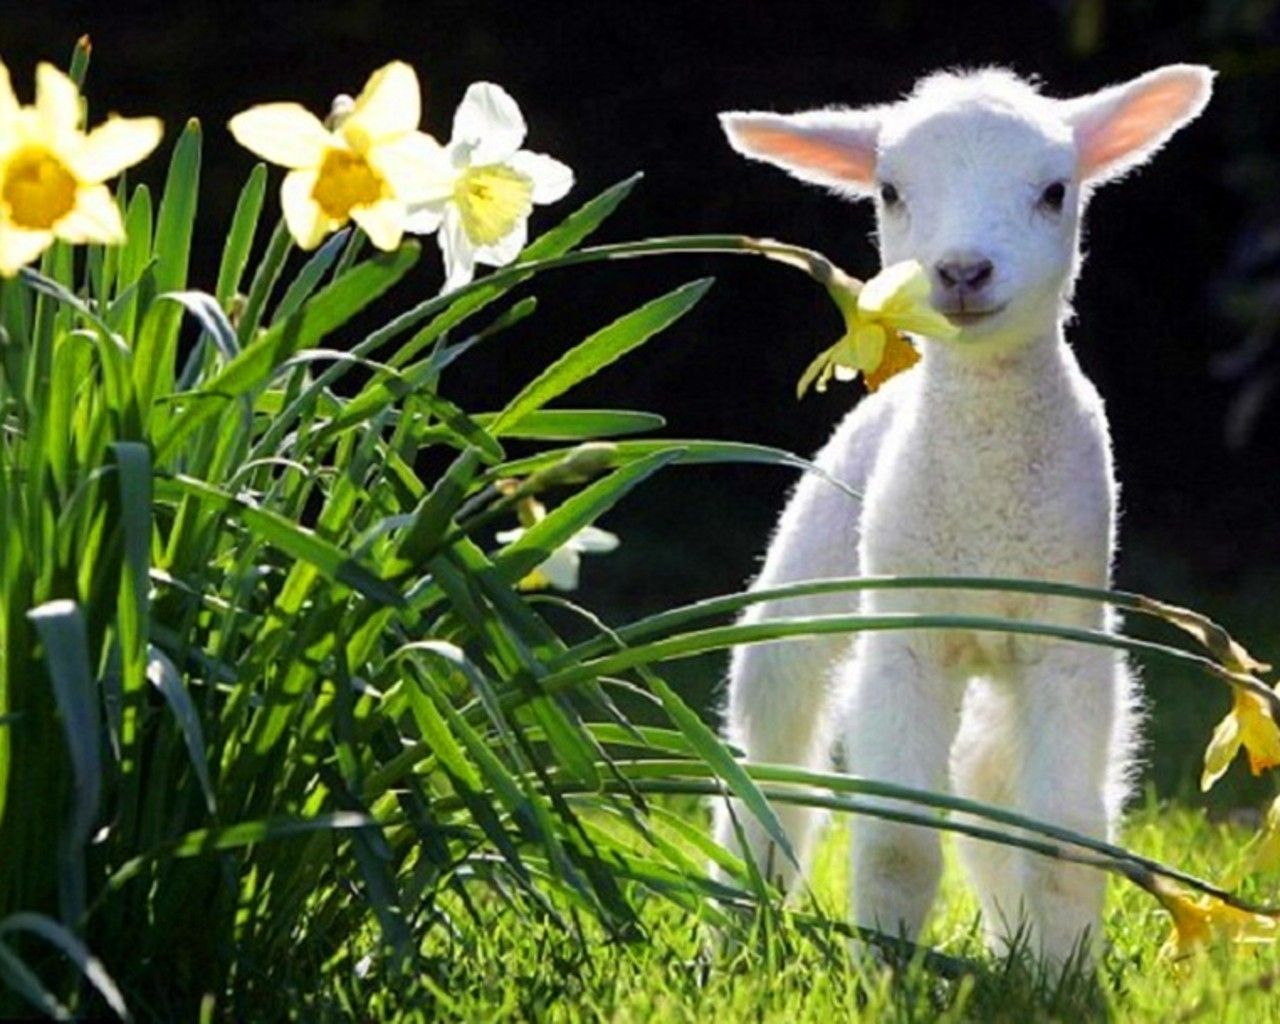 Download Wallpaper, Download flowers animals grass spring lamb daffodils lambs white flowers baby animals 1280x1024. Cute animals, Animals, Cute animal picture